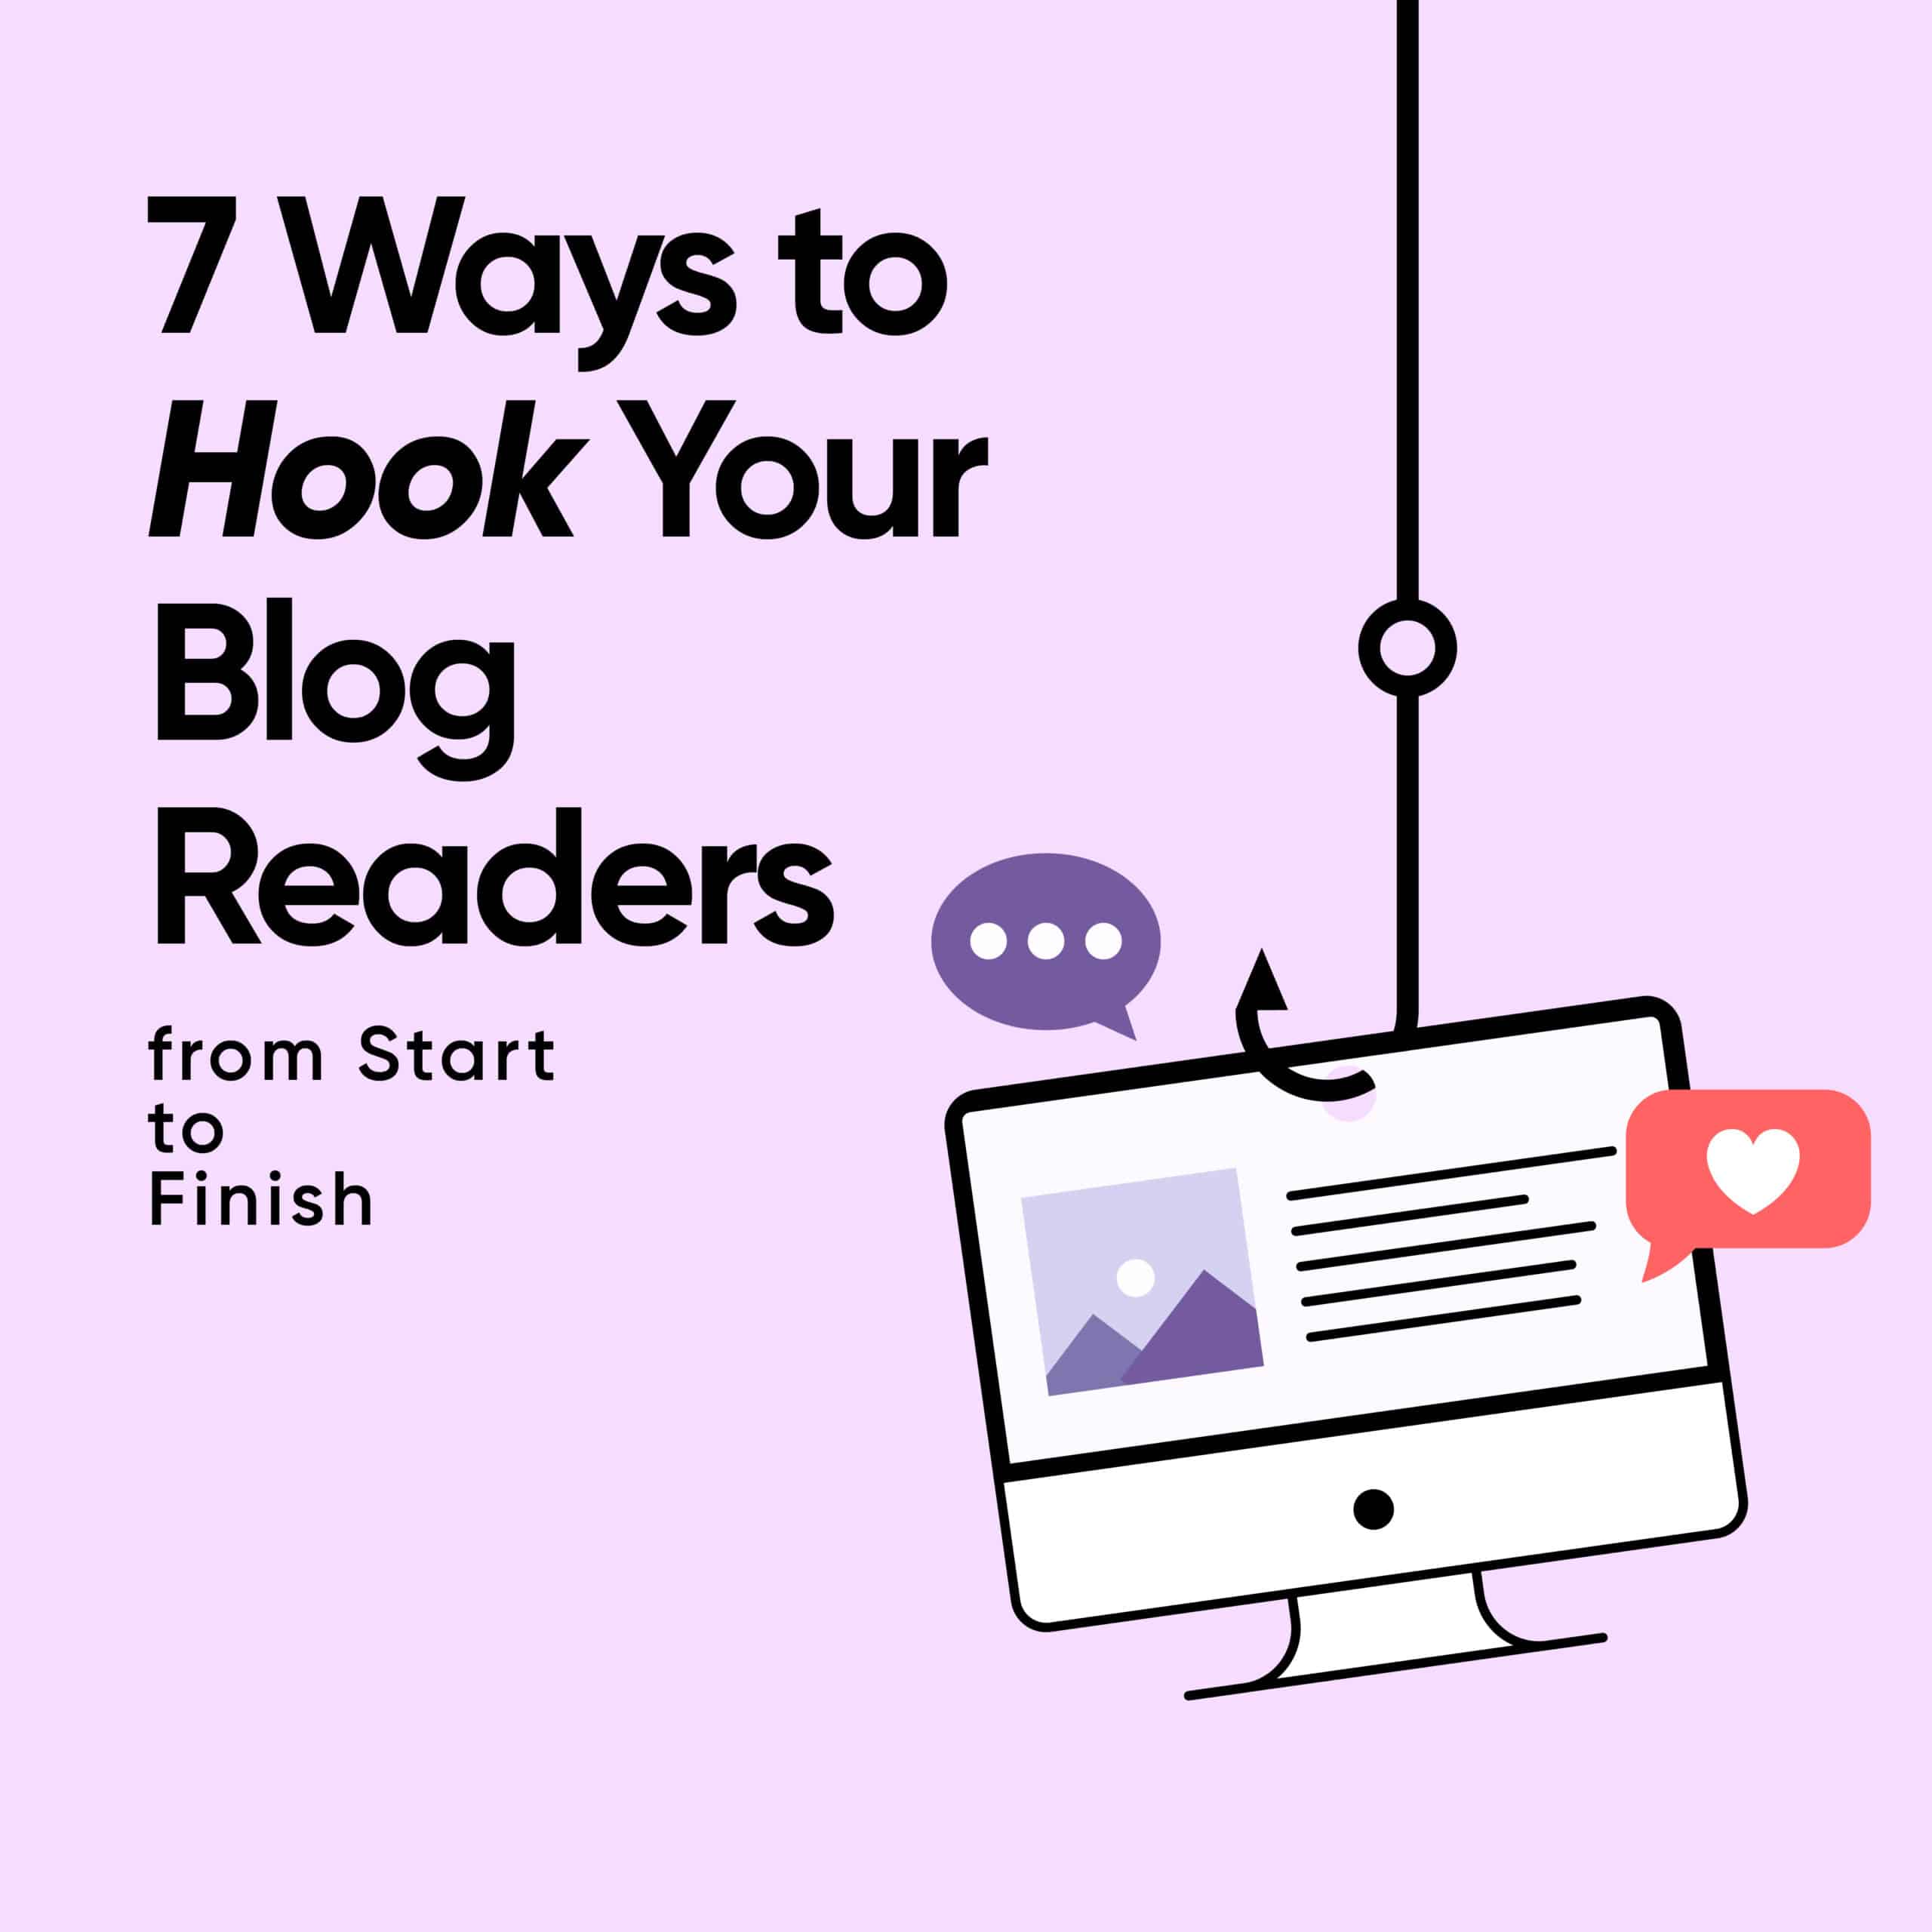 7 Ways to Hook Your Blog Readers from Start to Finish